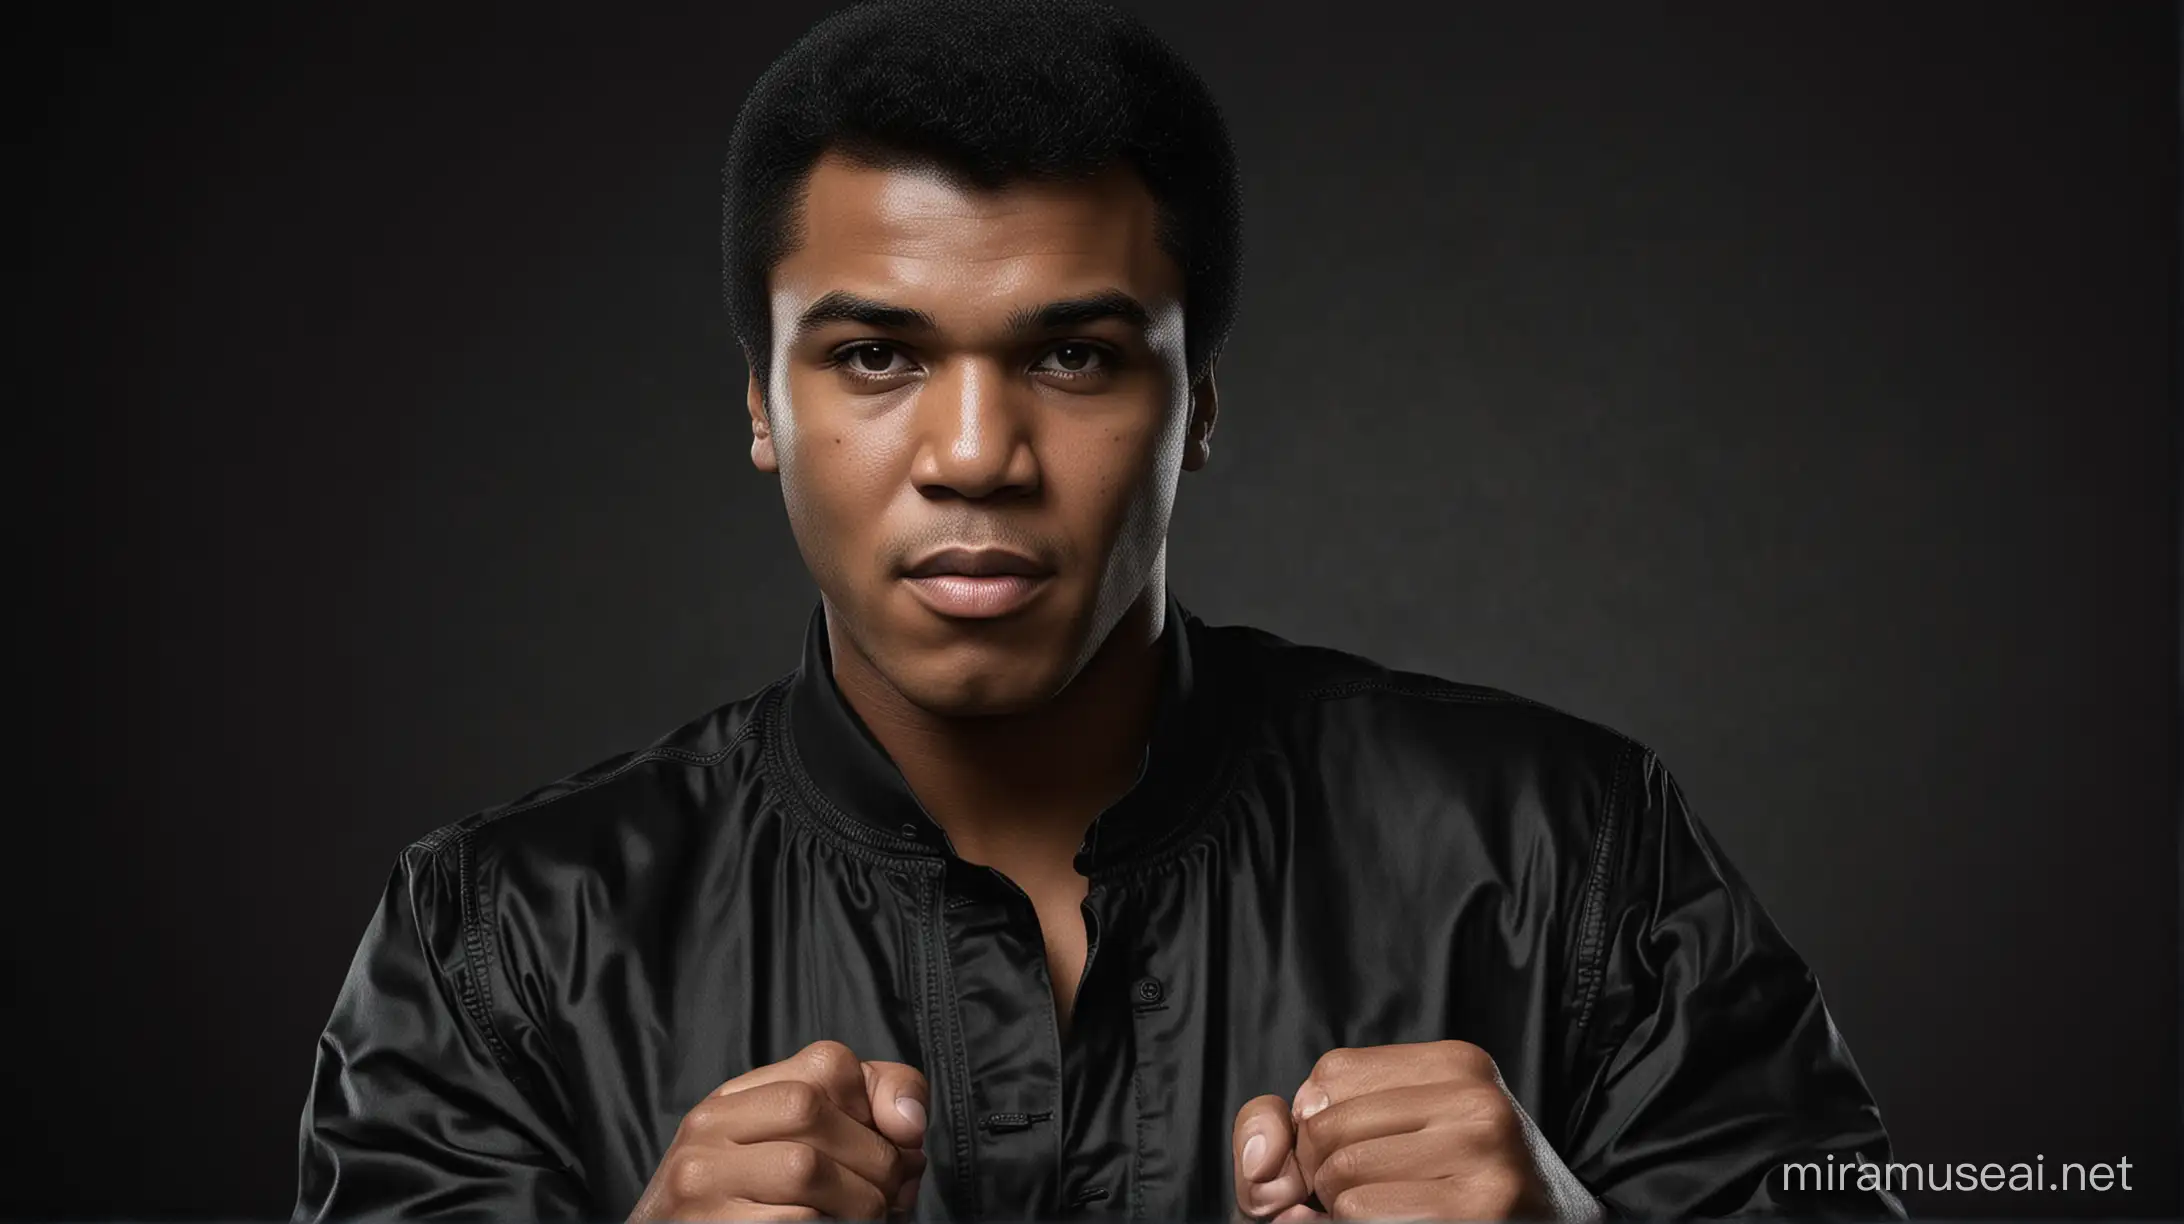 Create an image of Muhammad Ali wearing a sweet with a black background
